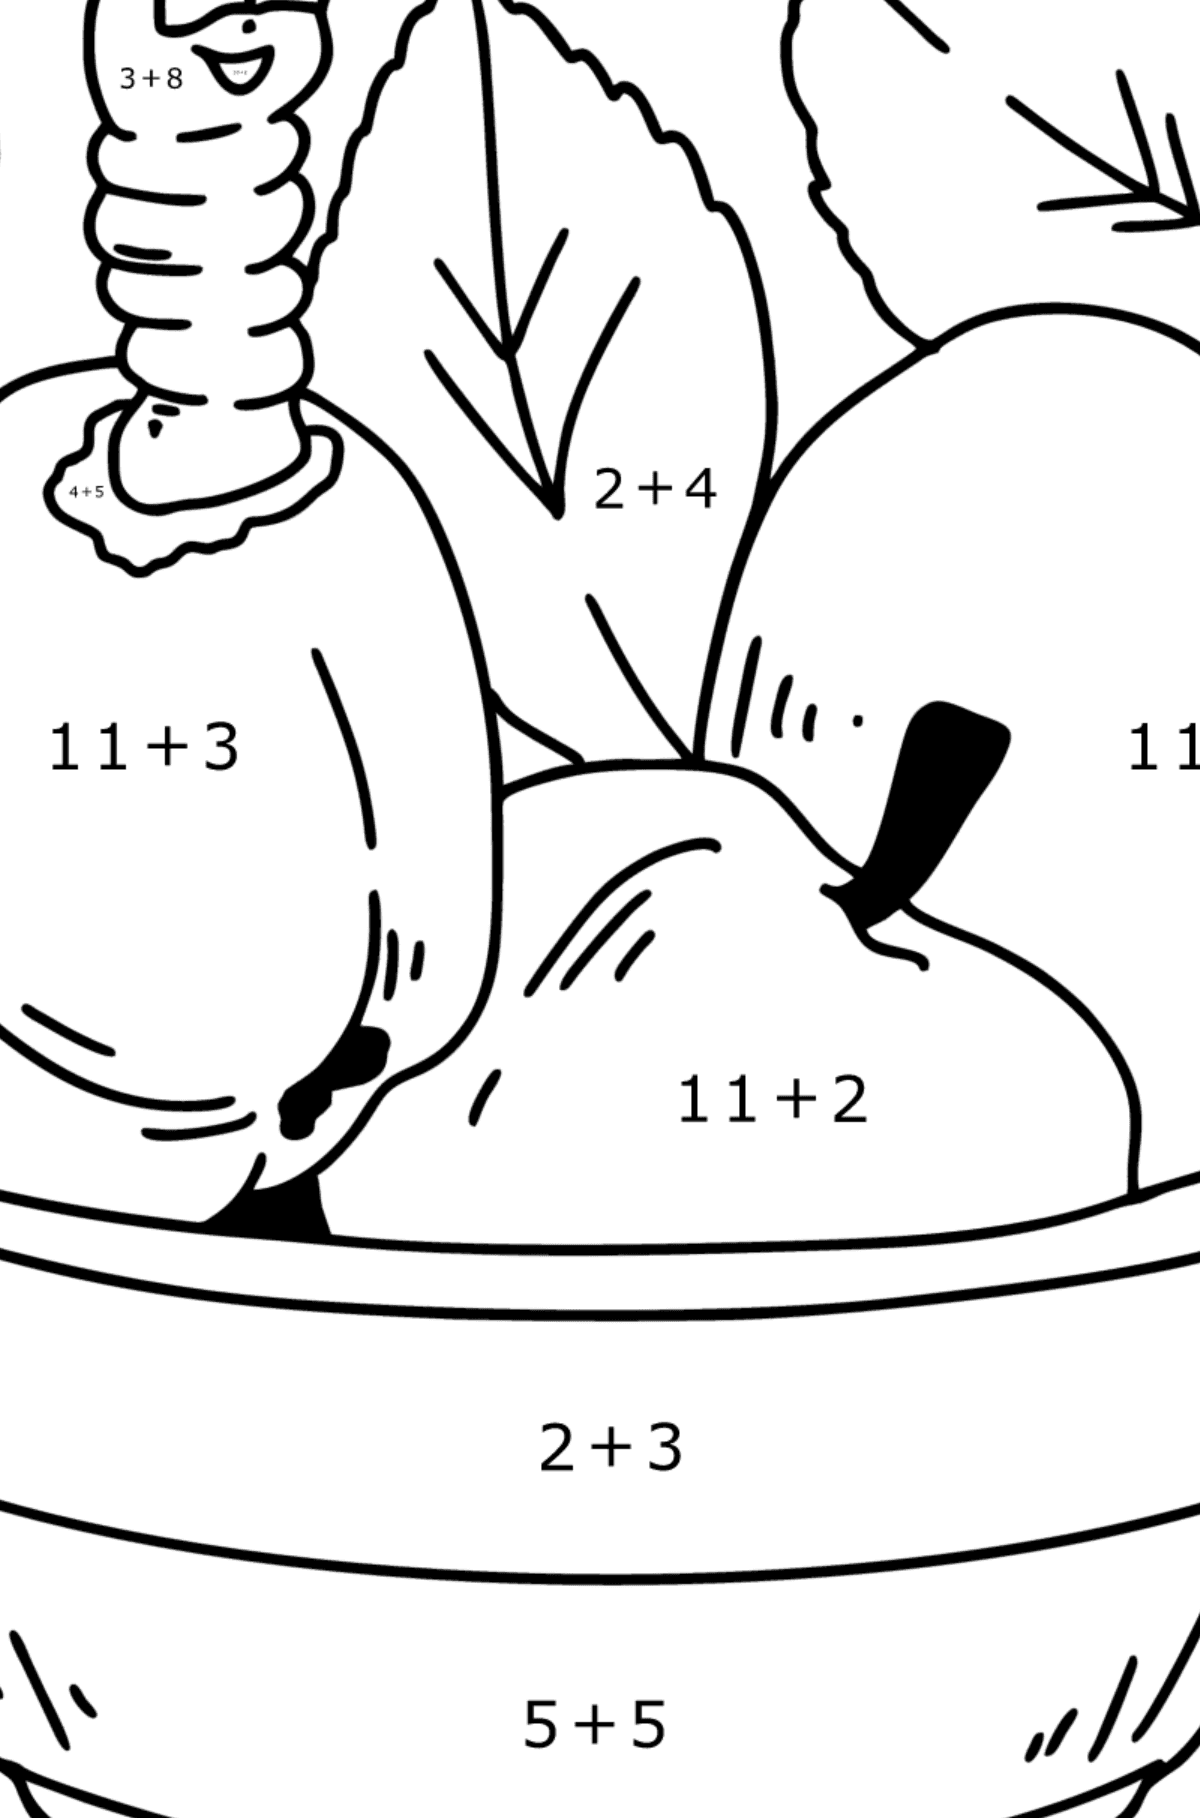 Coloring page Autumn - Apples and Сaterpillar - Math Coloring - Addition for Kids